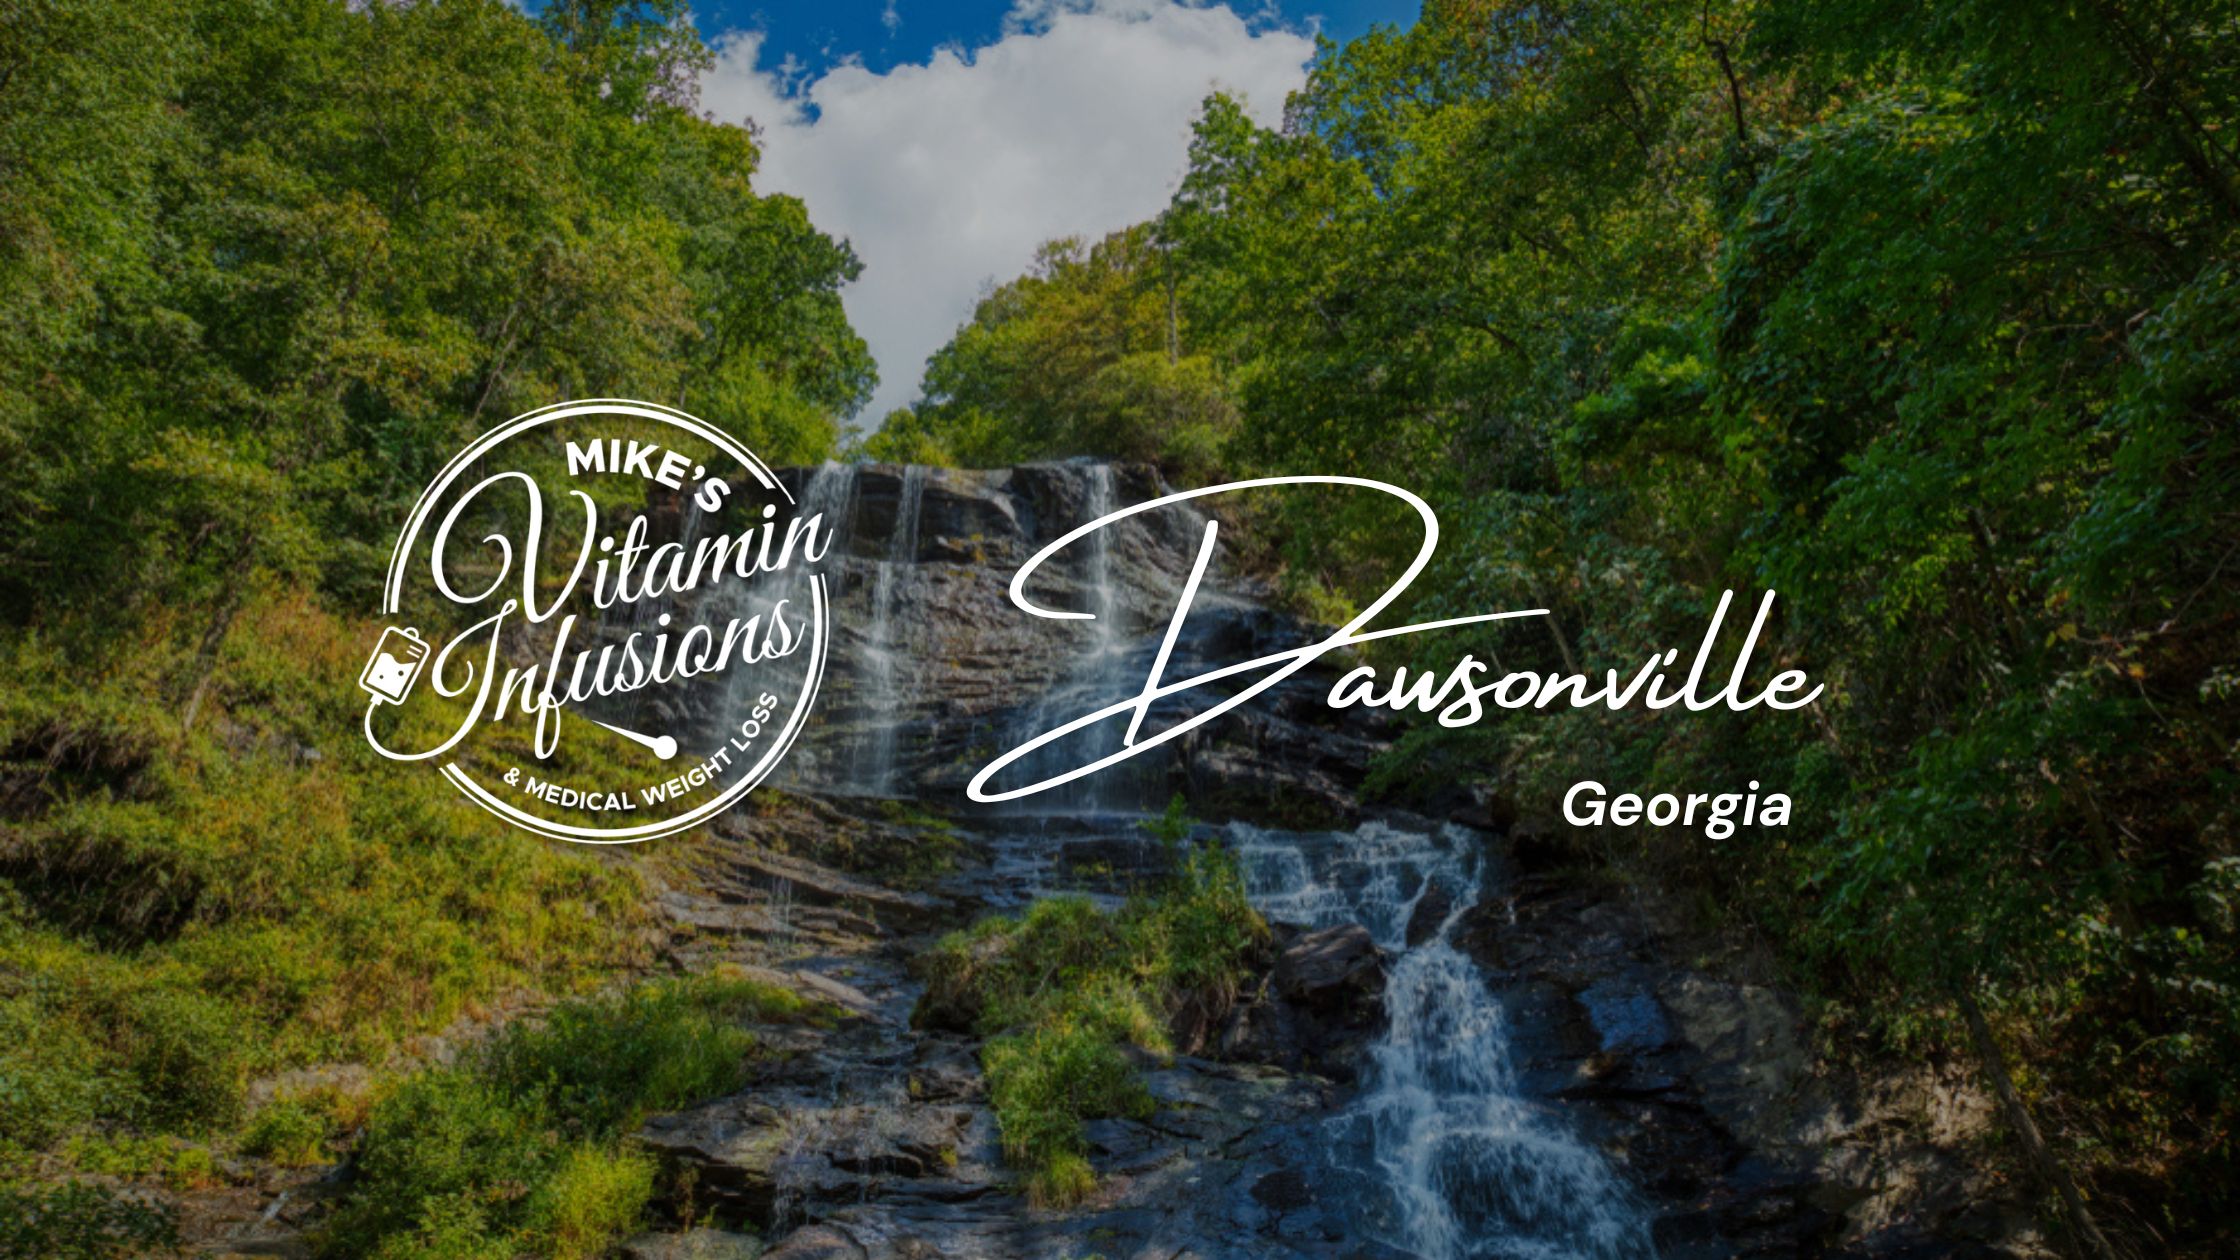 Image of a waterfall in dawsonville with the mike's vitamin infusions logo